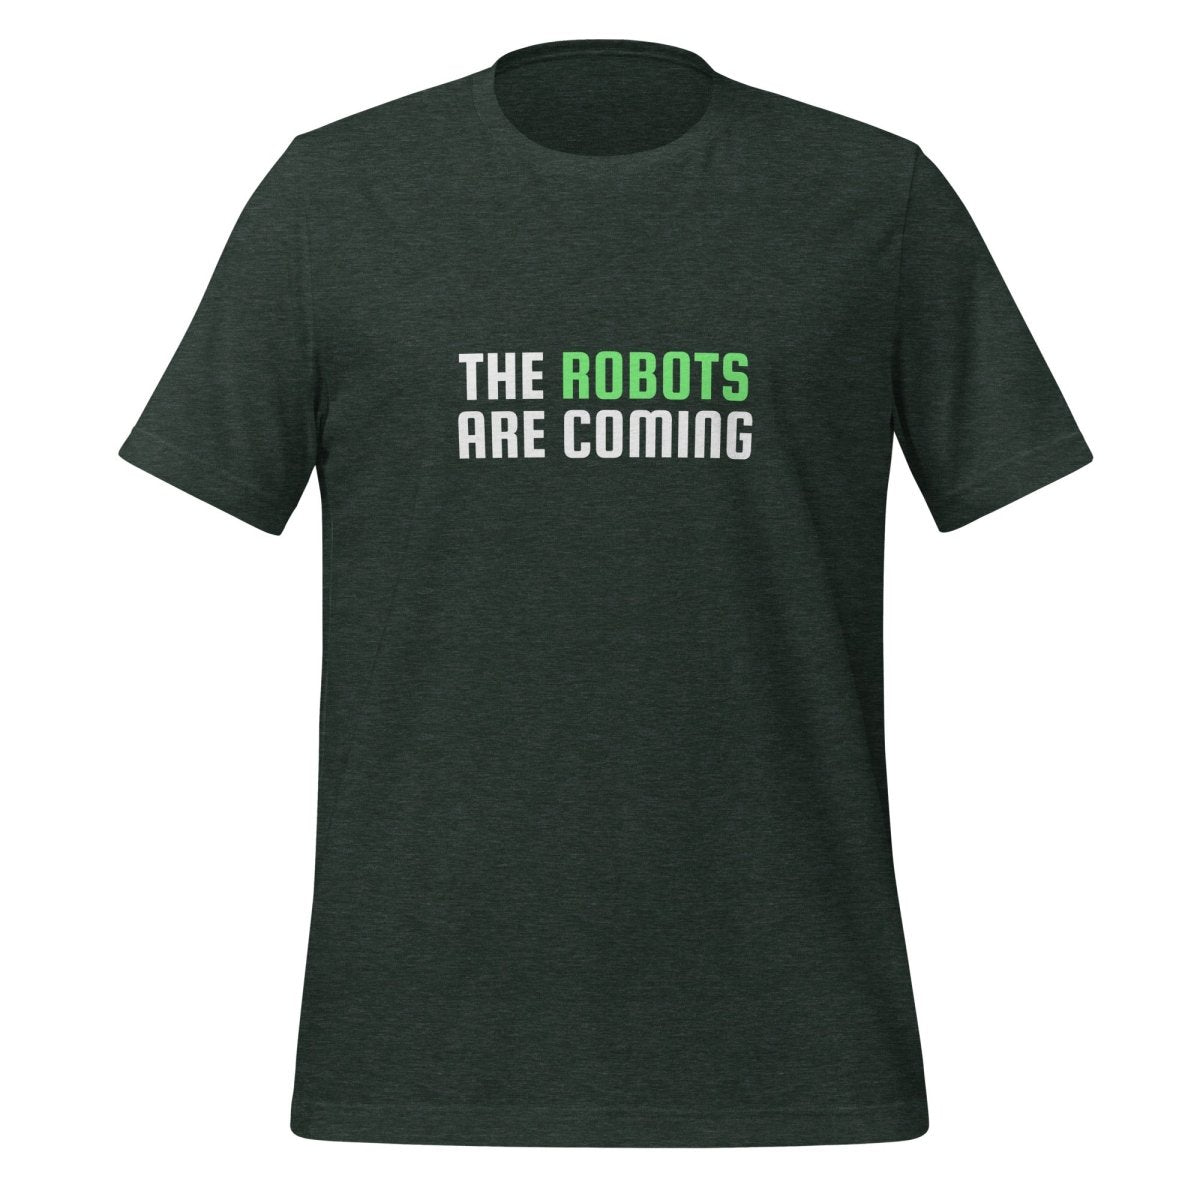 The Robots Are Coming (Green) T - Shirt 2 (unisex) - Heather Forest - AI Store